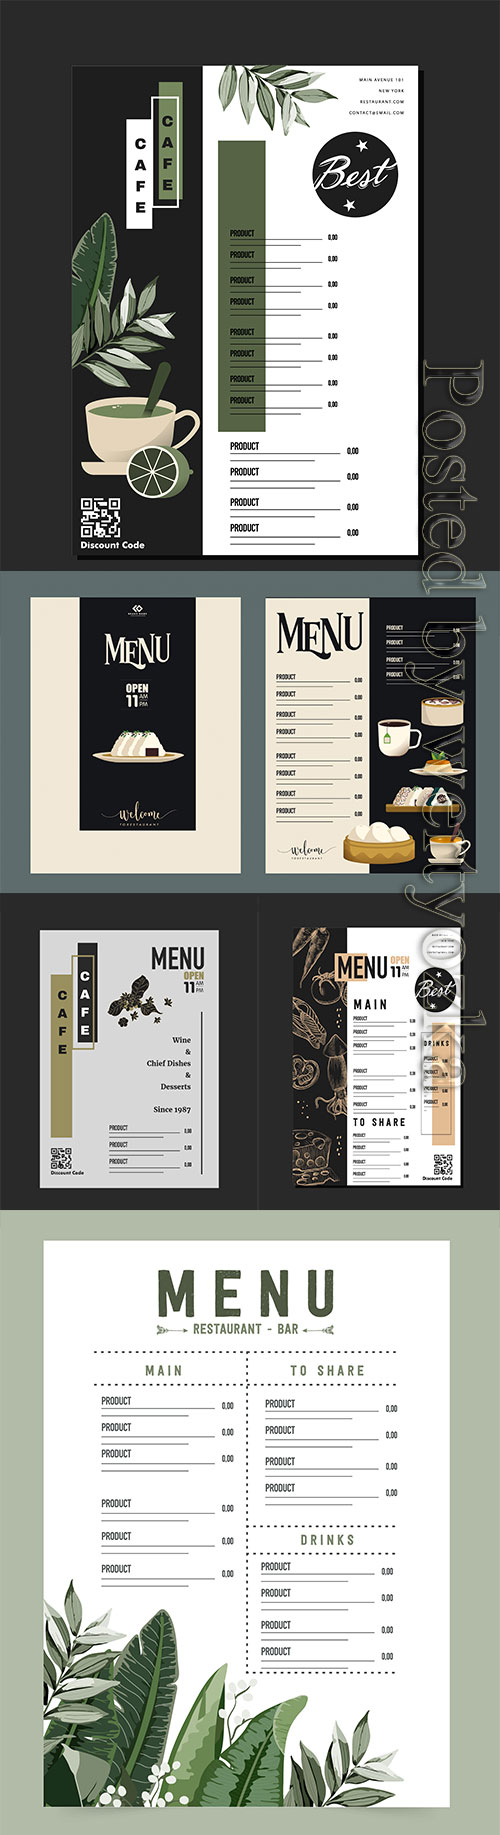 Menu for a cafe and restaurant with a beautiful design in vector